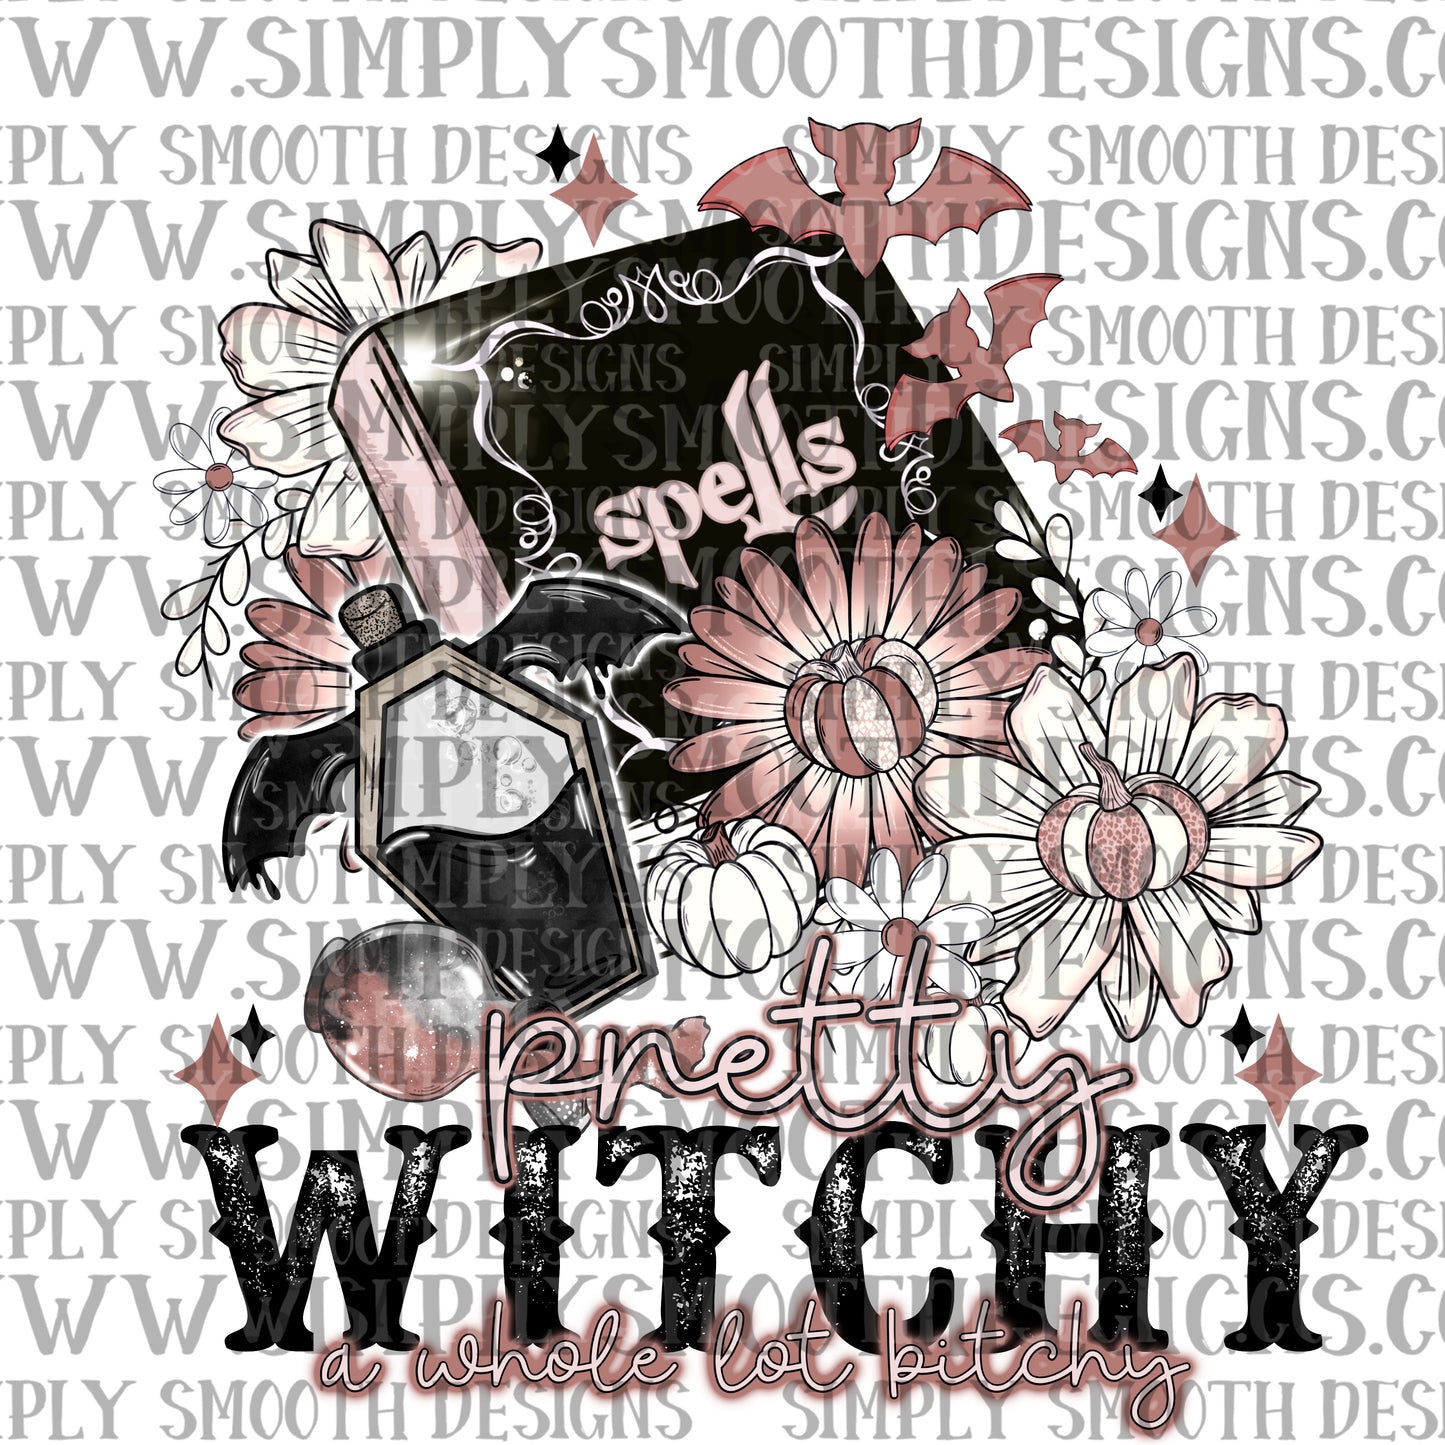 Pretty witchy a whole lot bitchy